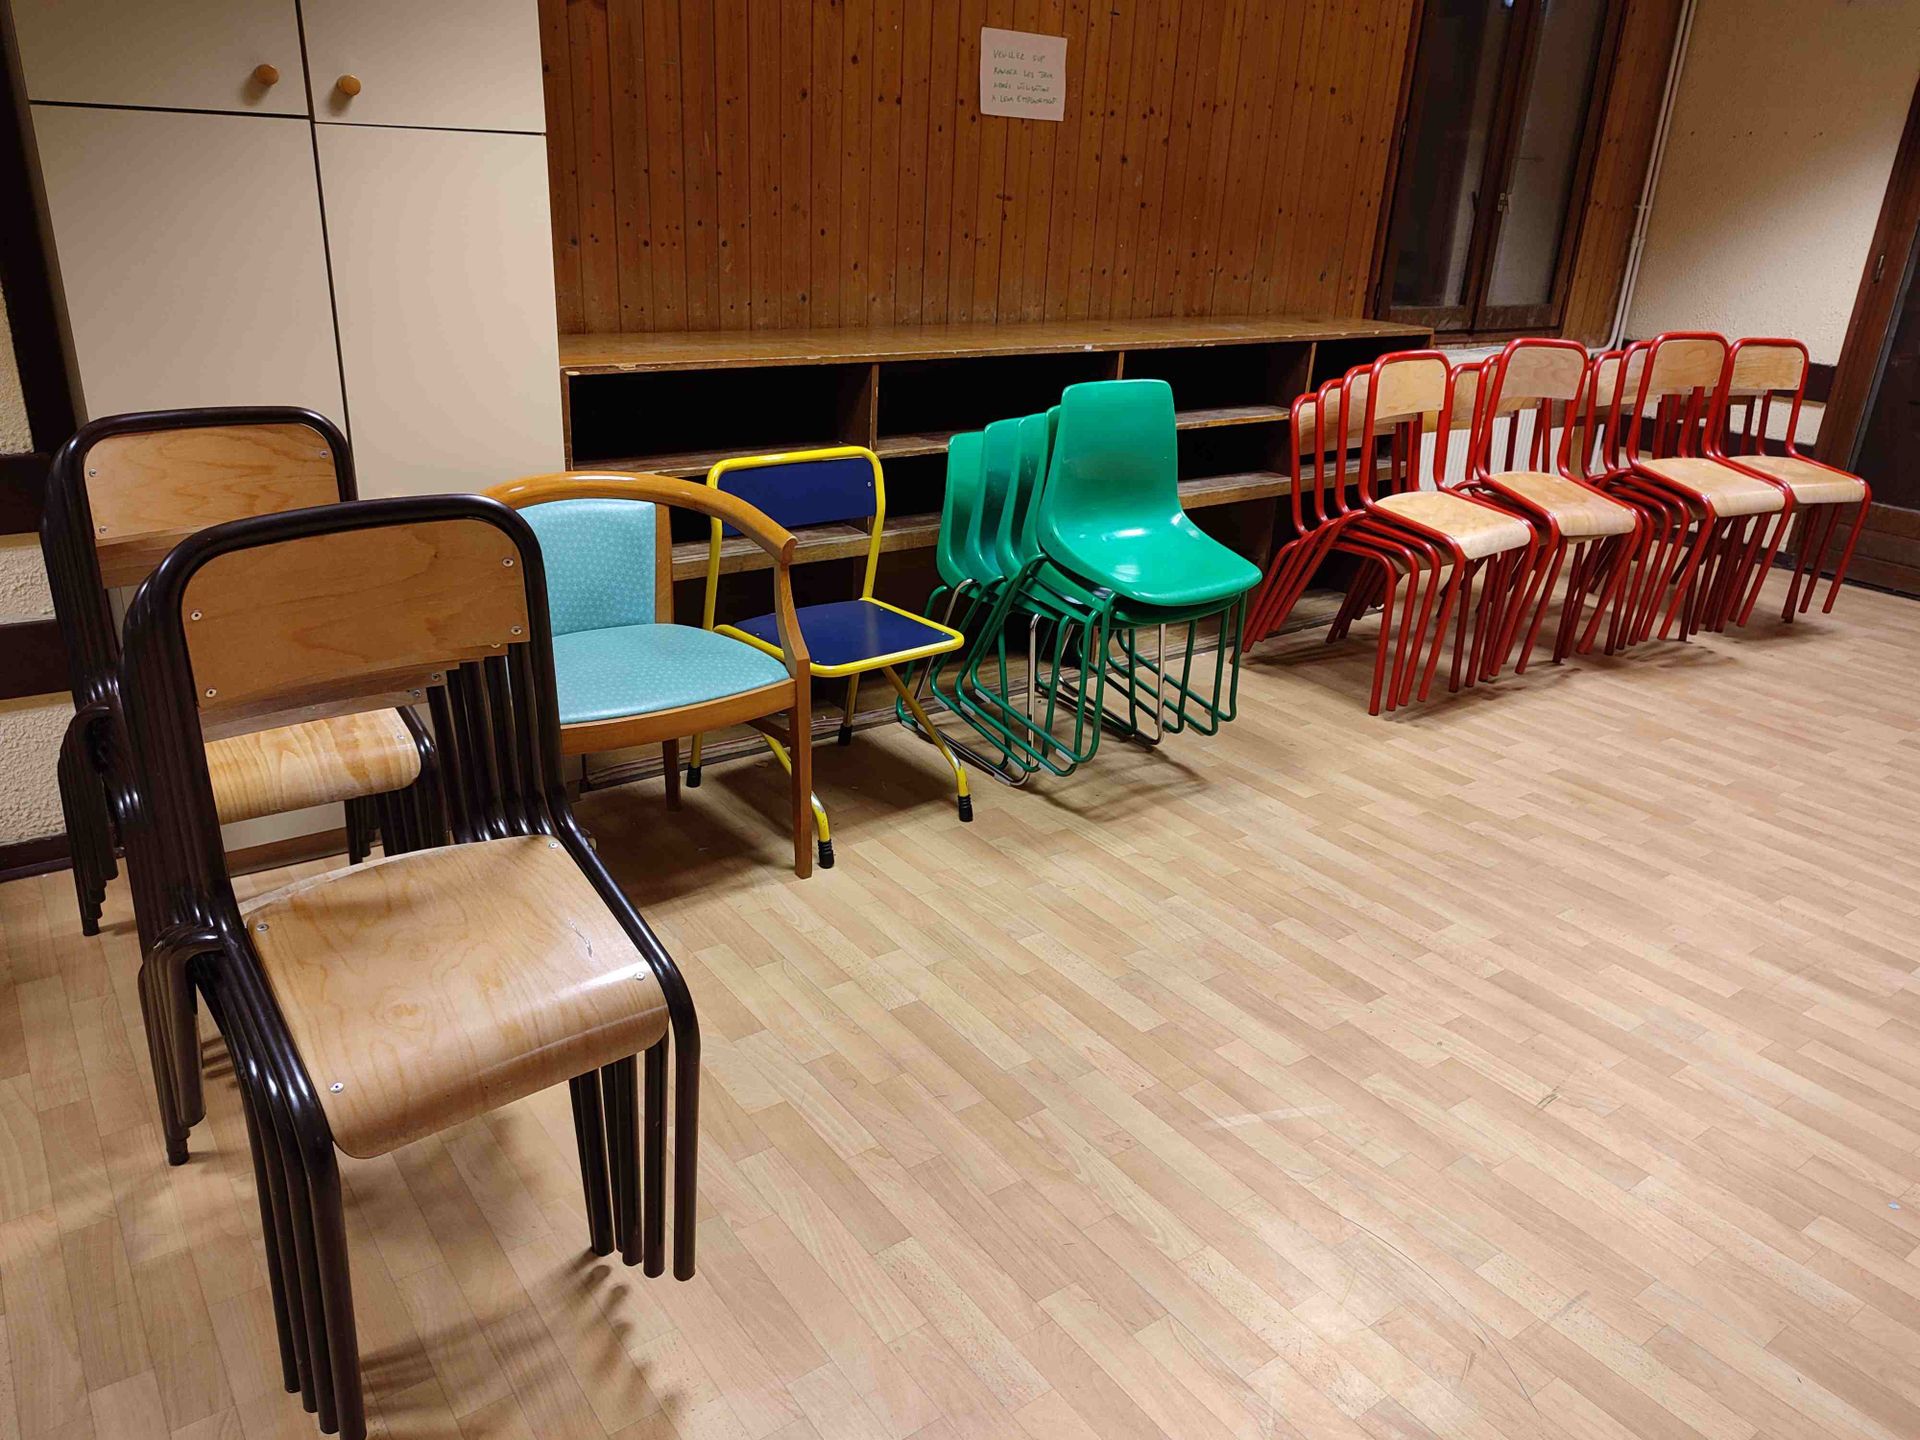 Null Classroom furniture set in used condition including:
- 34 chairs (various m&hellip;